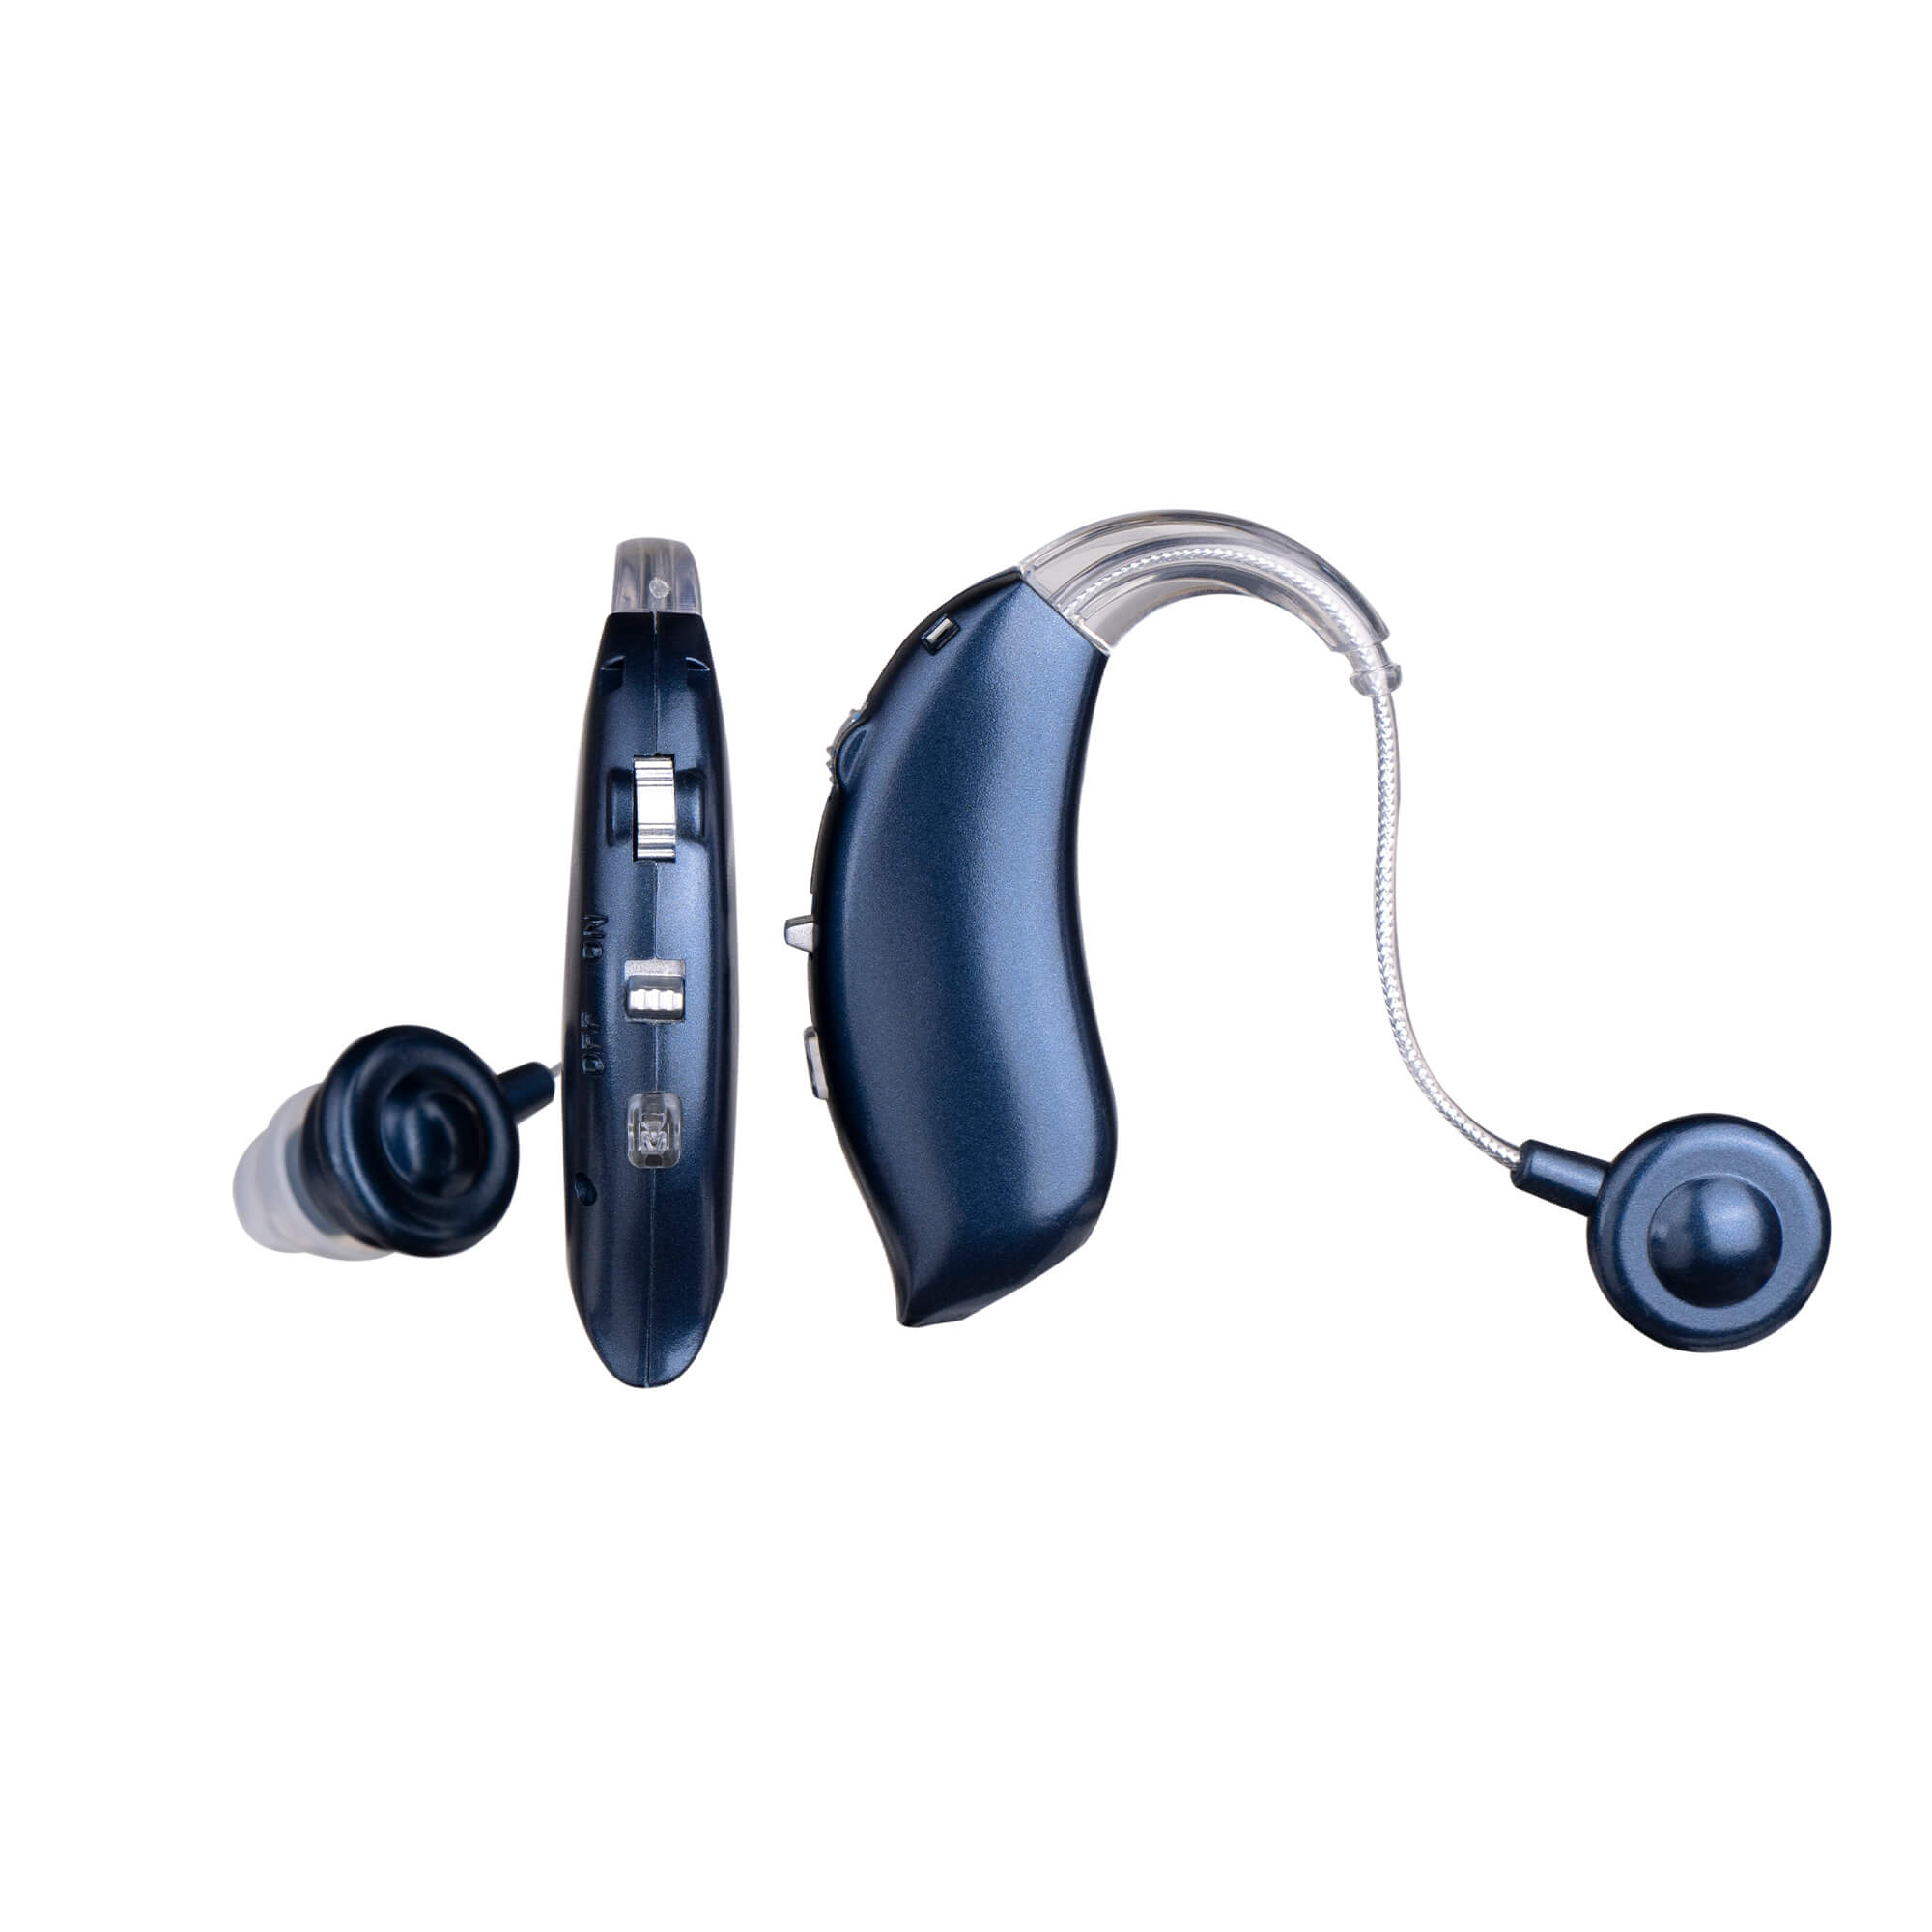 Fisdemo J Bluetooth Hearing Aids for Seniors Adults to Enjoy hand-free Phone Calls/Music/TV featured with RIC and DSP Chip for Clear Sound, 12H+ battery life